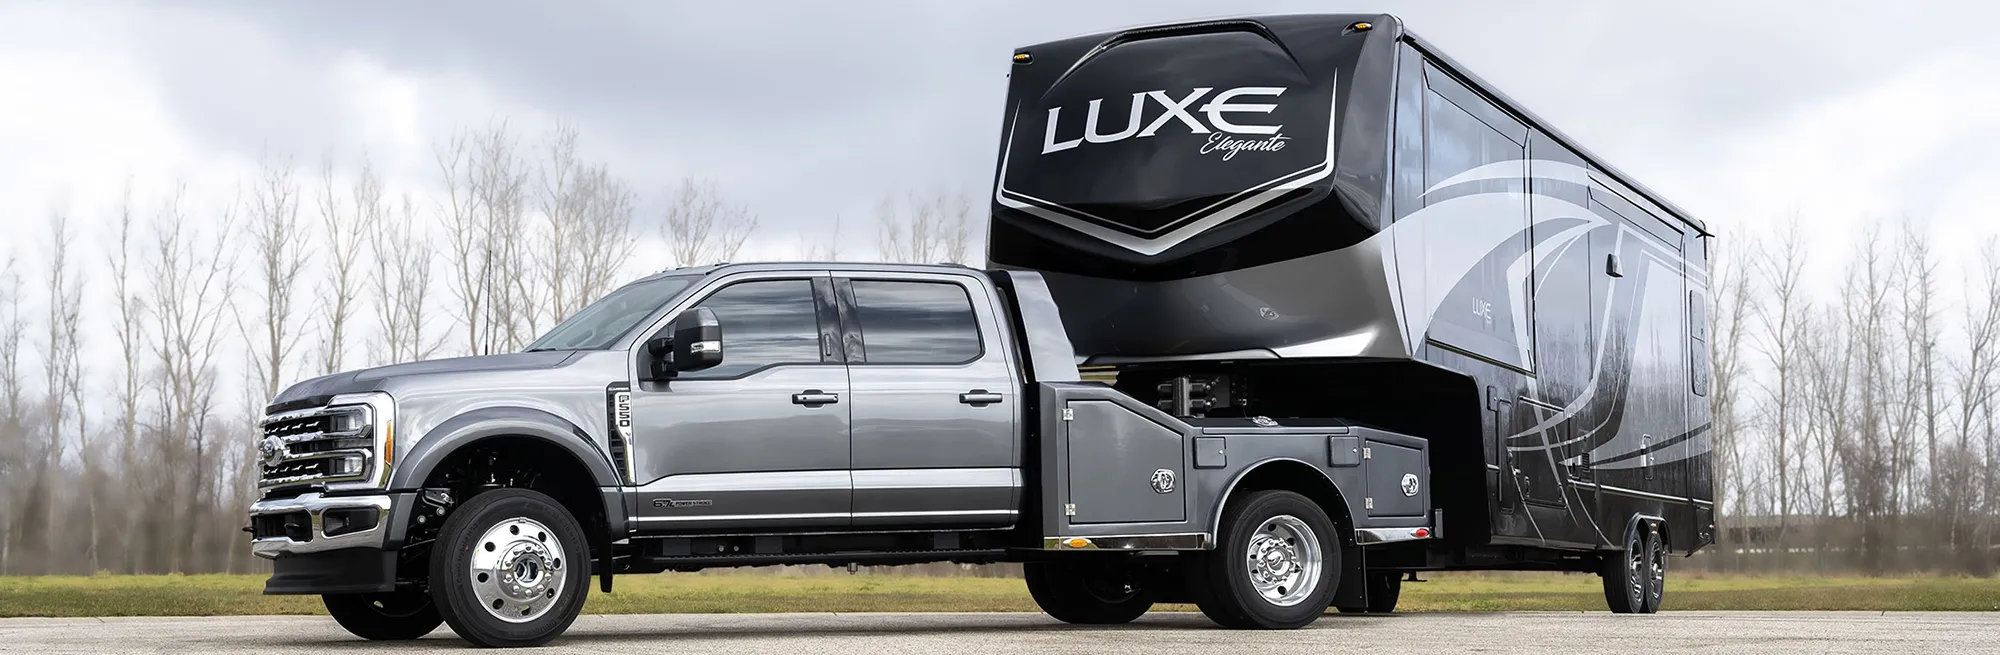 The Best Four-Season Luxury 5th Wheel. The Luxe Elegante hauled by a Ford F550.